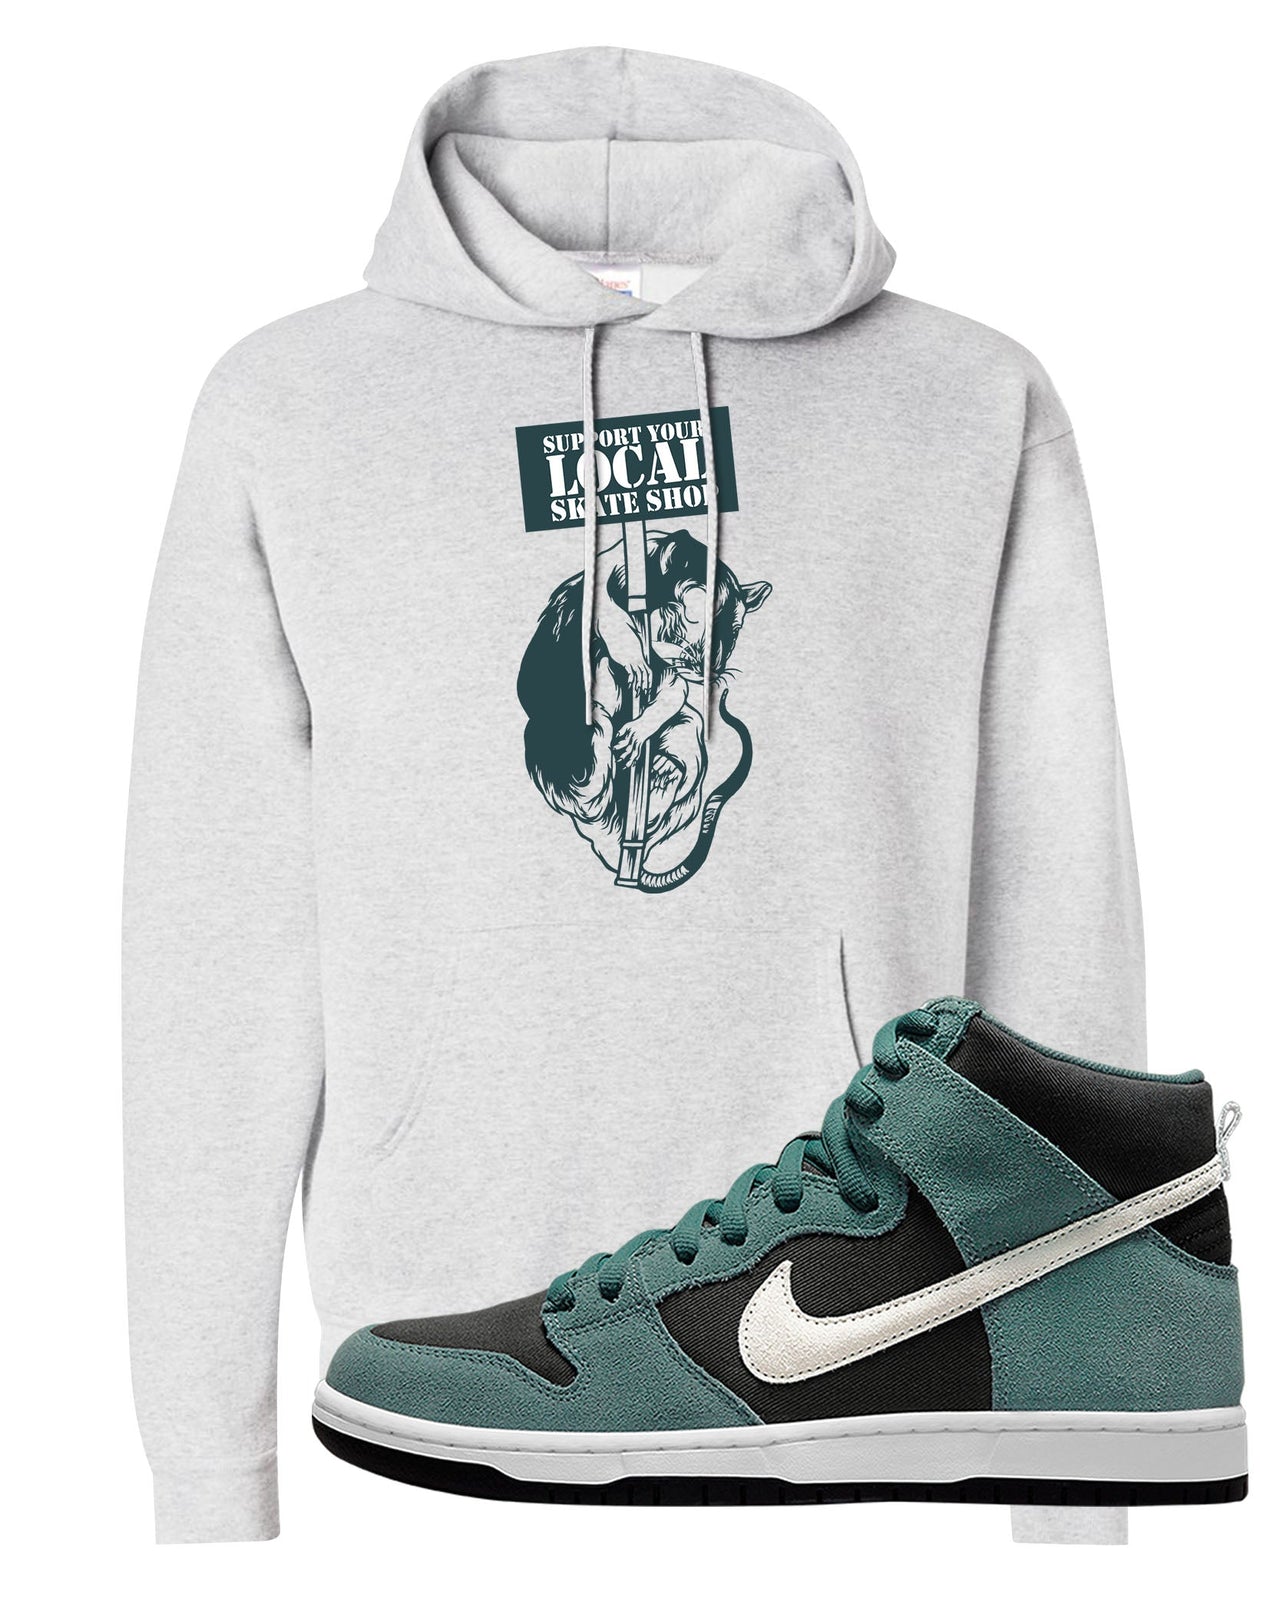 Green Suede High Dunks Hoodie | Support Your Local Skate Shop, Ash